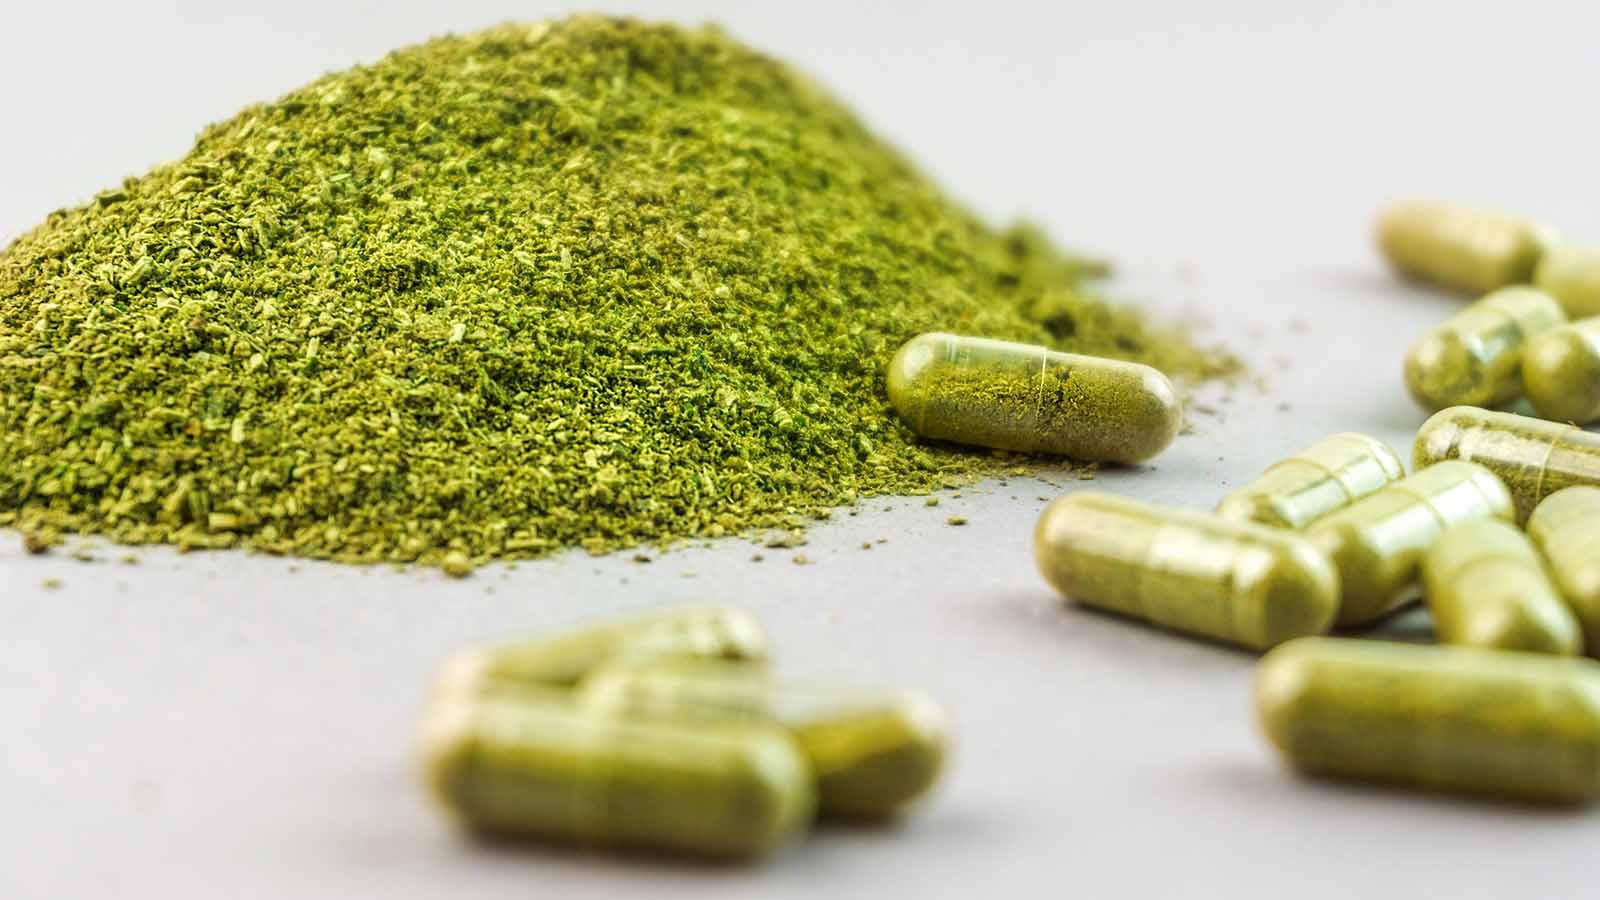 On-the-go bliss – Convenience of kratom in tablet form